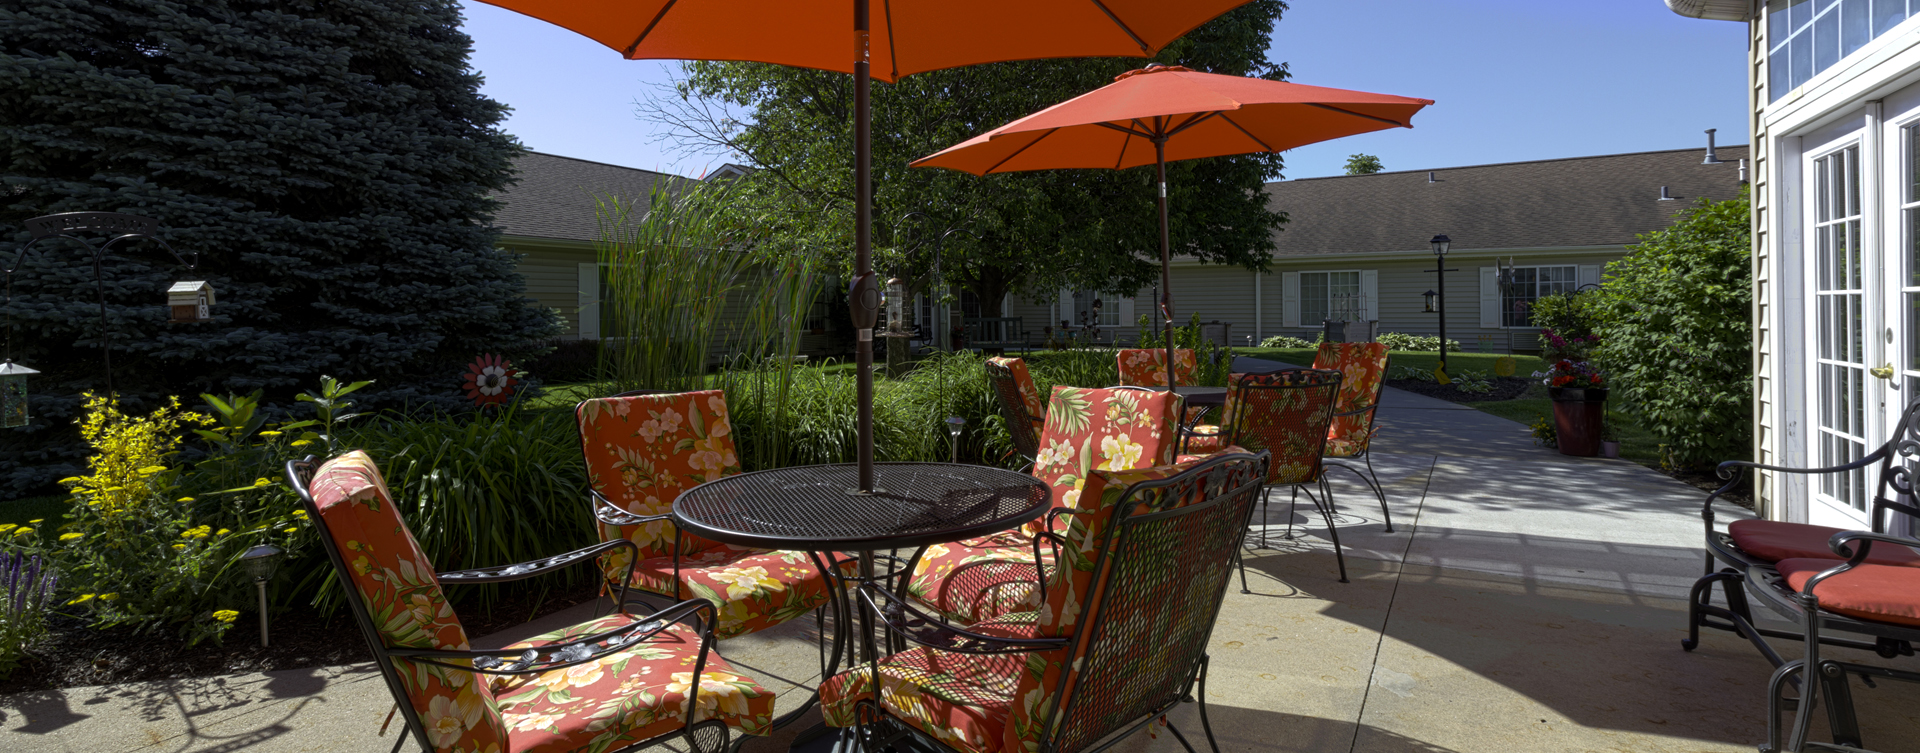 Enjoy bird watching, gardening and barbecuing in our courtyard at Bickford of Omaha - Hickory